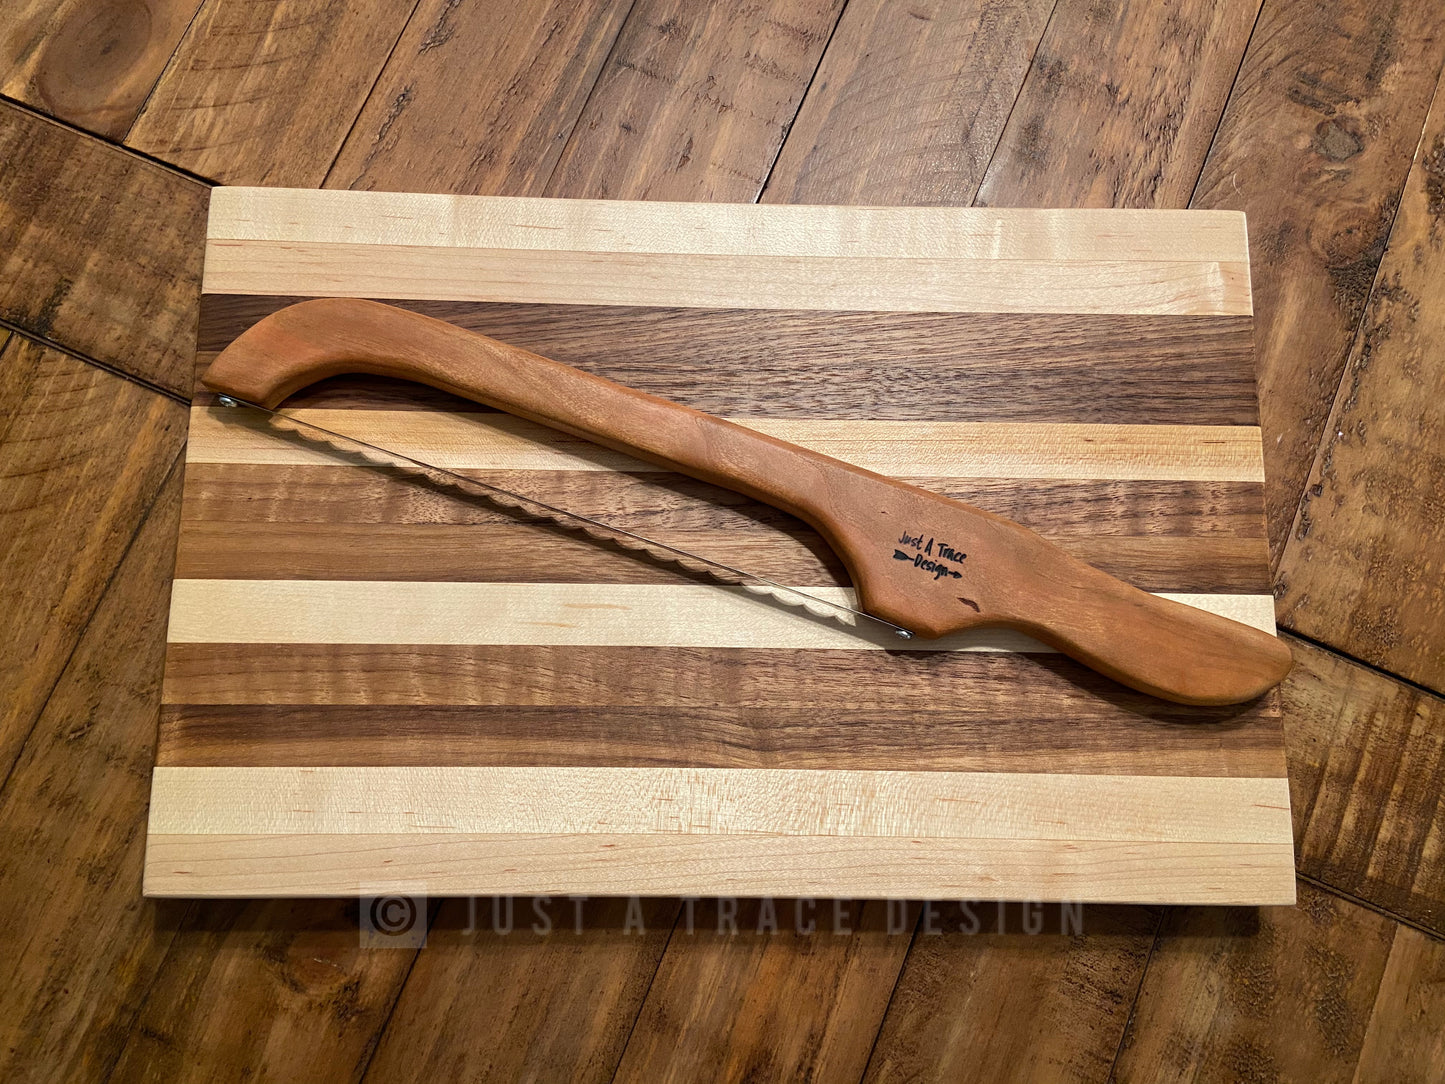 Bow Bread Knife, Wood Bread Knife, Fiddle Bread Knife, Wooden Bread Knife, Foodie Gift, Housewarming Gift, Wedding Gift, Anniversary Gift